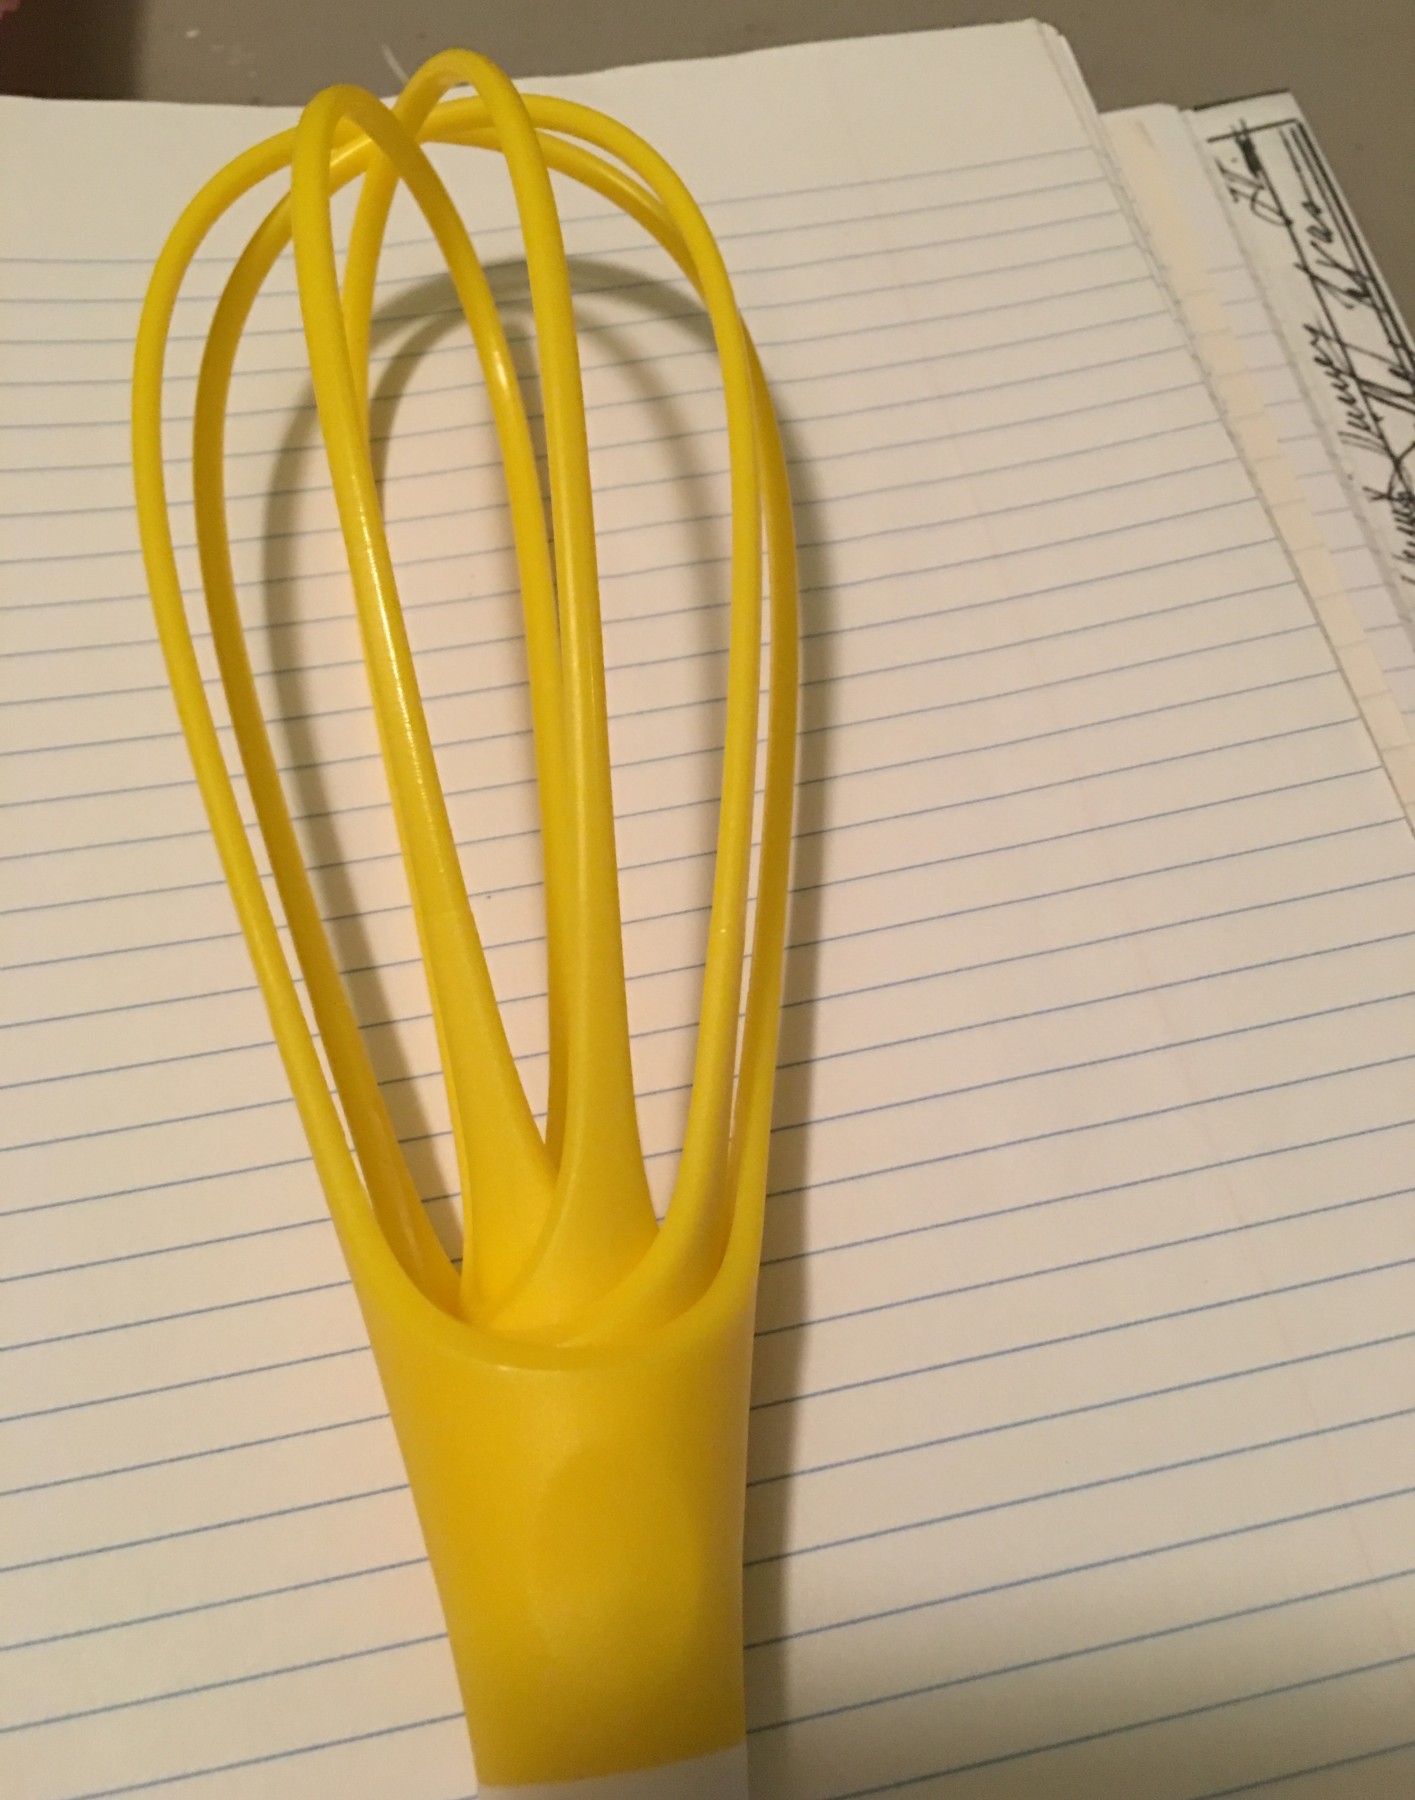 What a wonderful whisk!